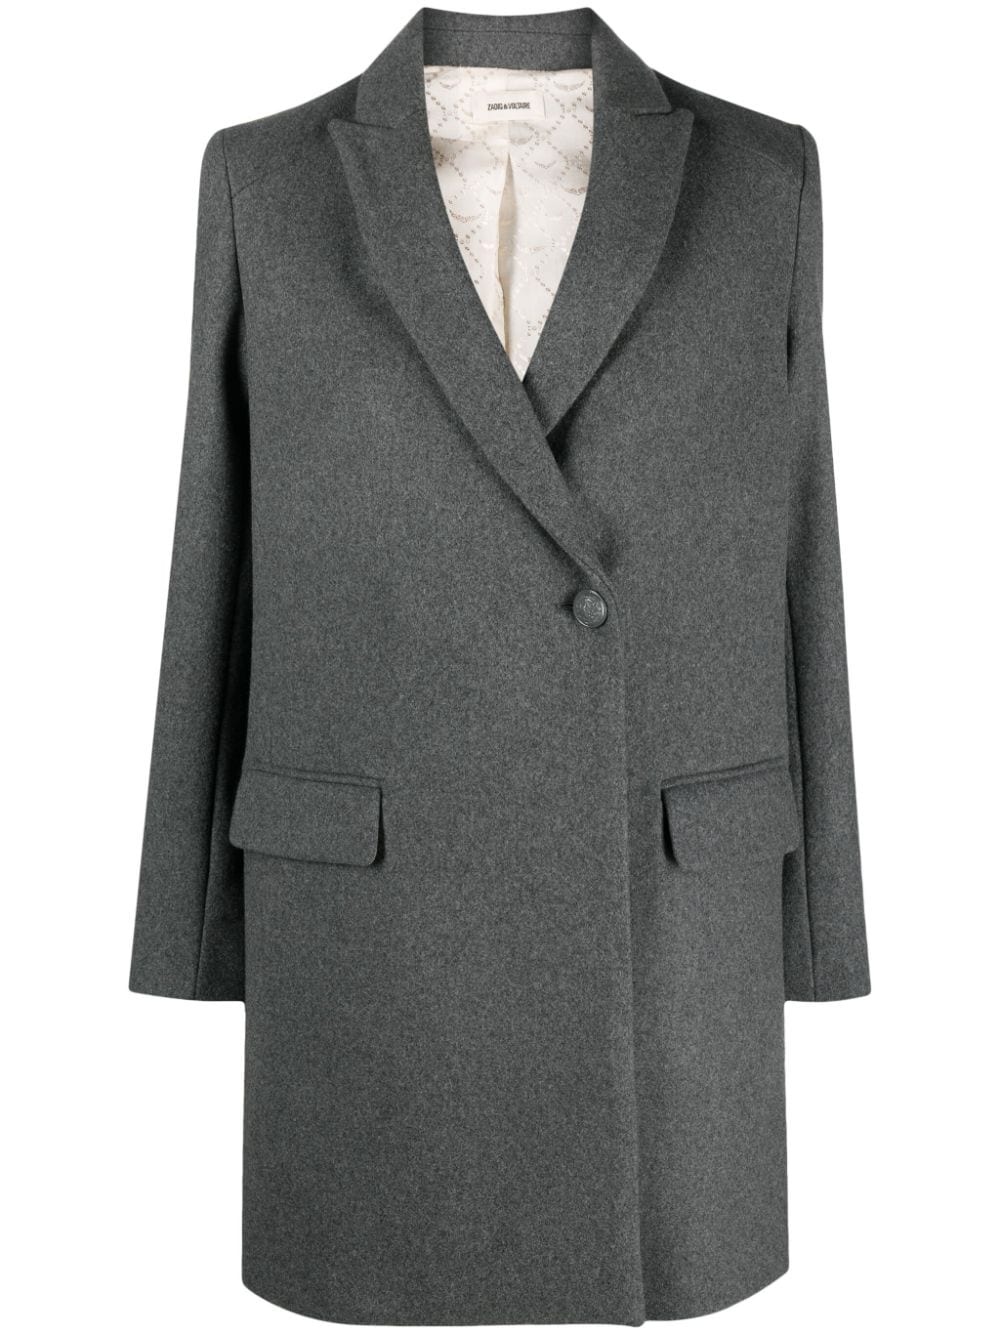 Zadig & Voltaire double-breasted coat | farfetch | REVERSIBLE